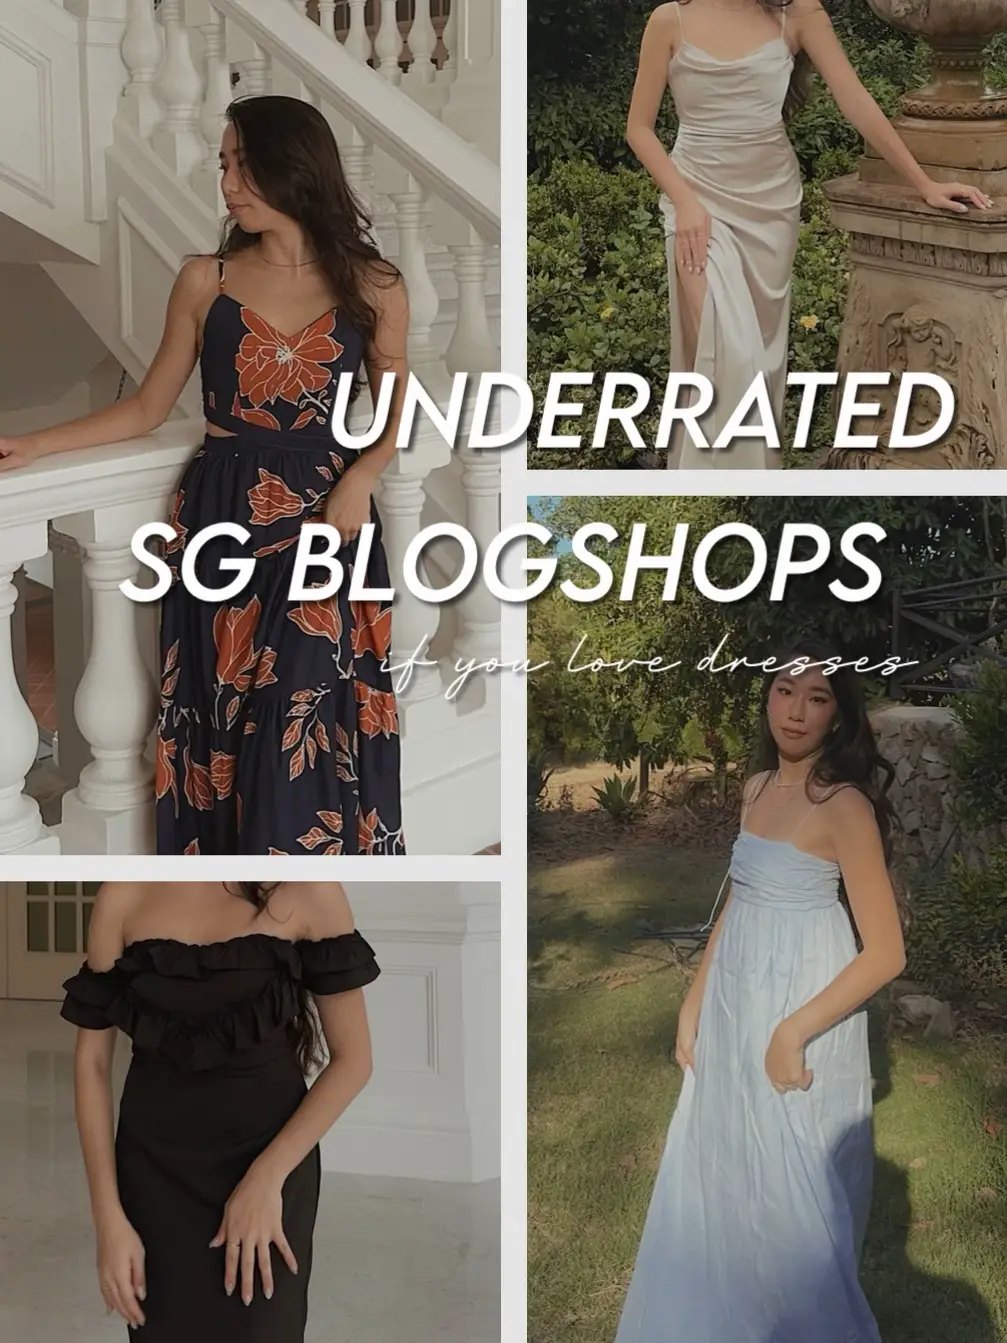 LOVE DRESSES? TRY THESE UNDERRATED SG BRANDS's images